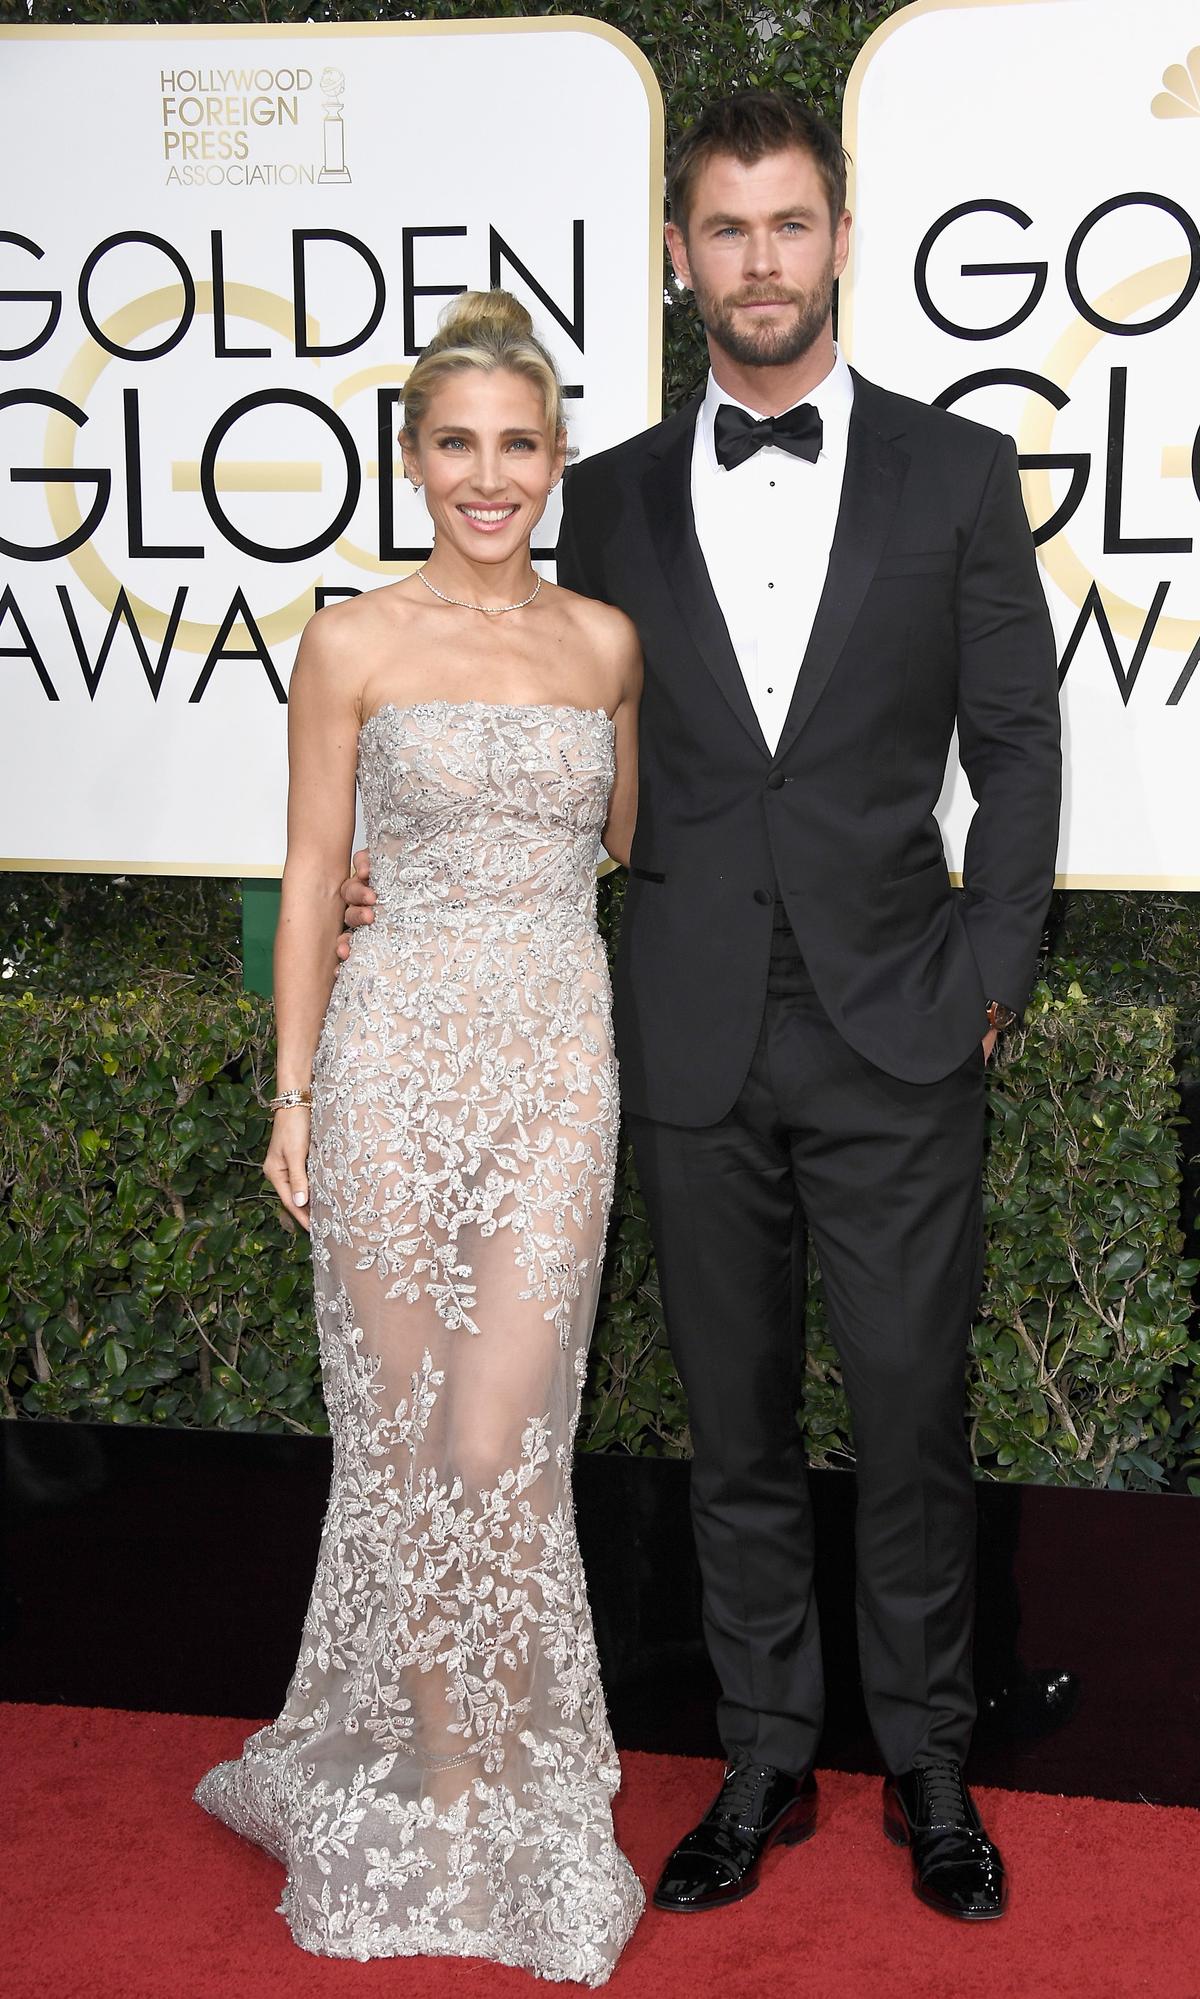 Chris Hemsworth and wife Elsa Pataky at the 2017 Golden Globe Awards  (©Getty Images | <a href="https://www.gettyimages.com/detail/news-photo/actor-chris-hemsworth-and-model-elsa-pataky-attend-the-74th-news-photo/631244764?adppopup=true">Frazer Harrison</a>)